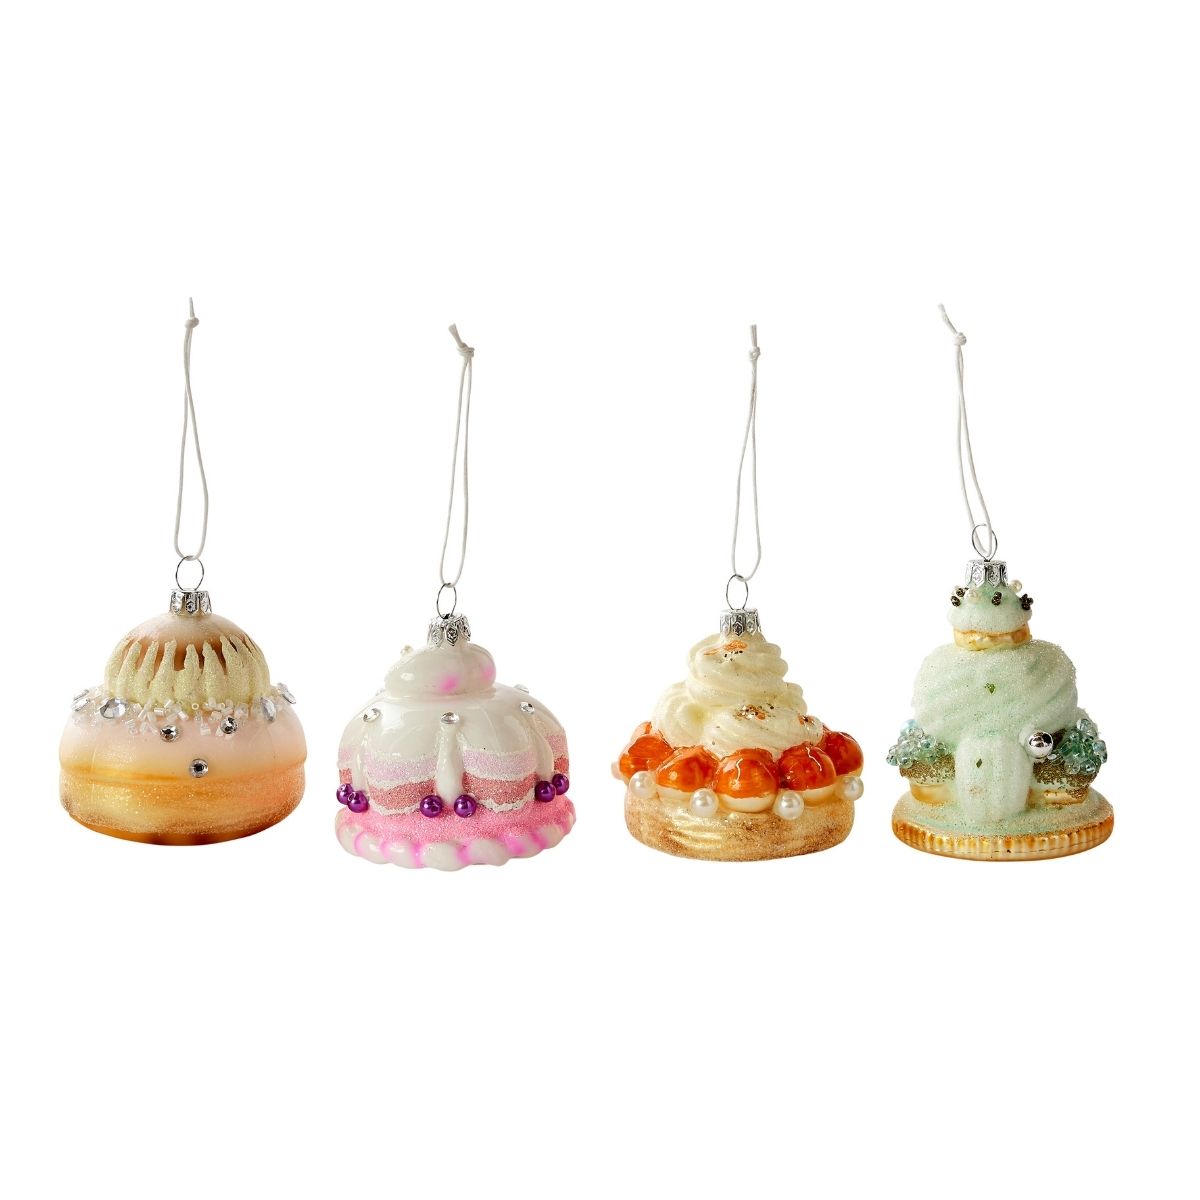 French Patisserie Ornaments